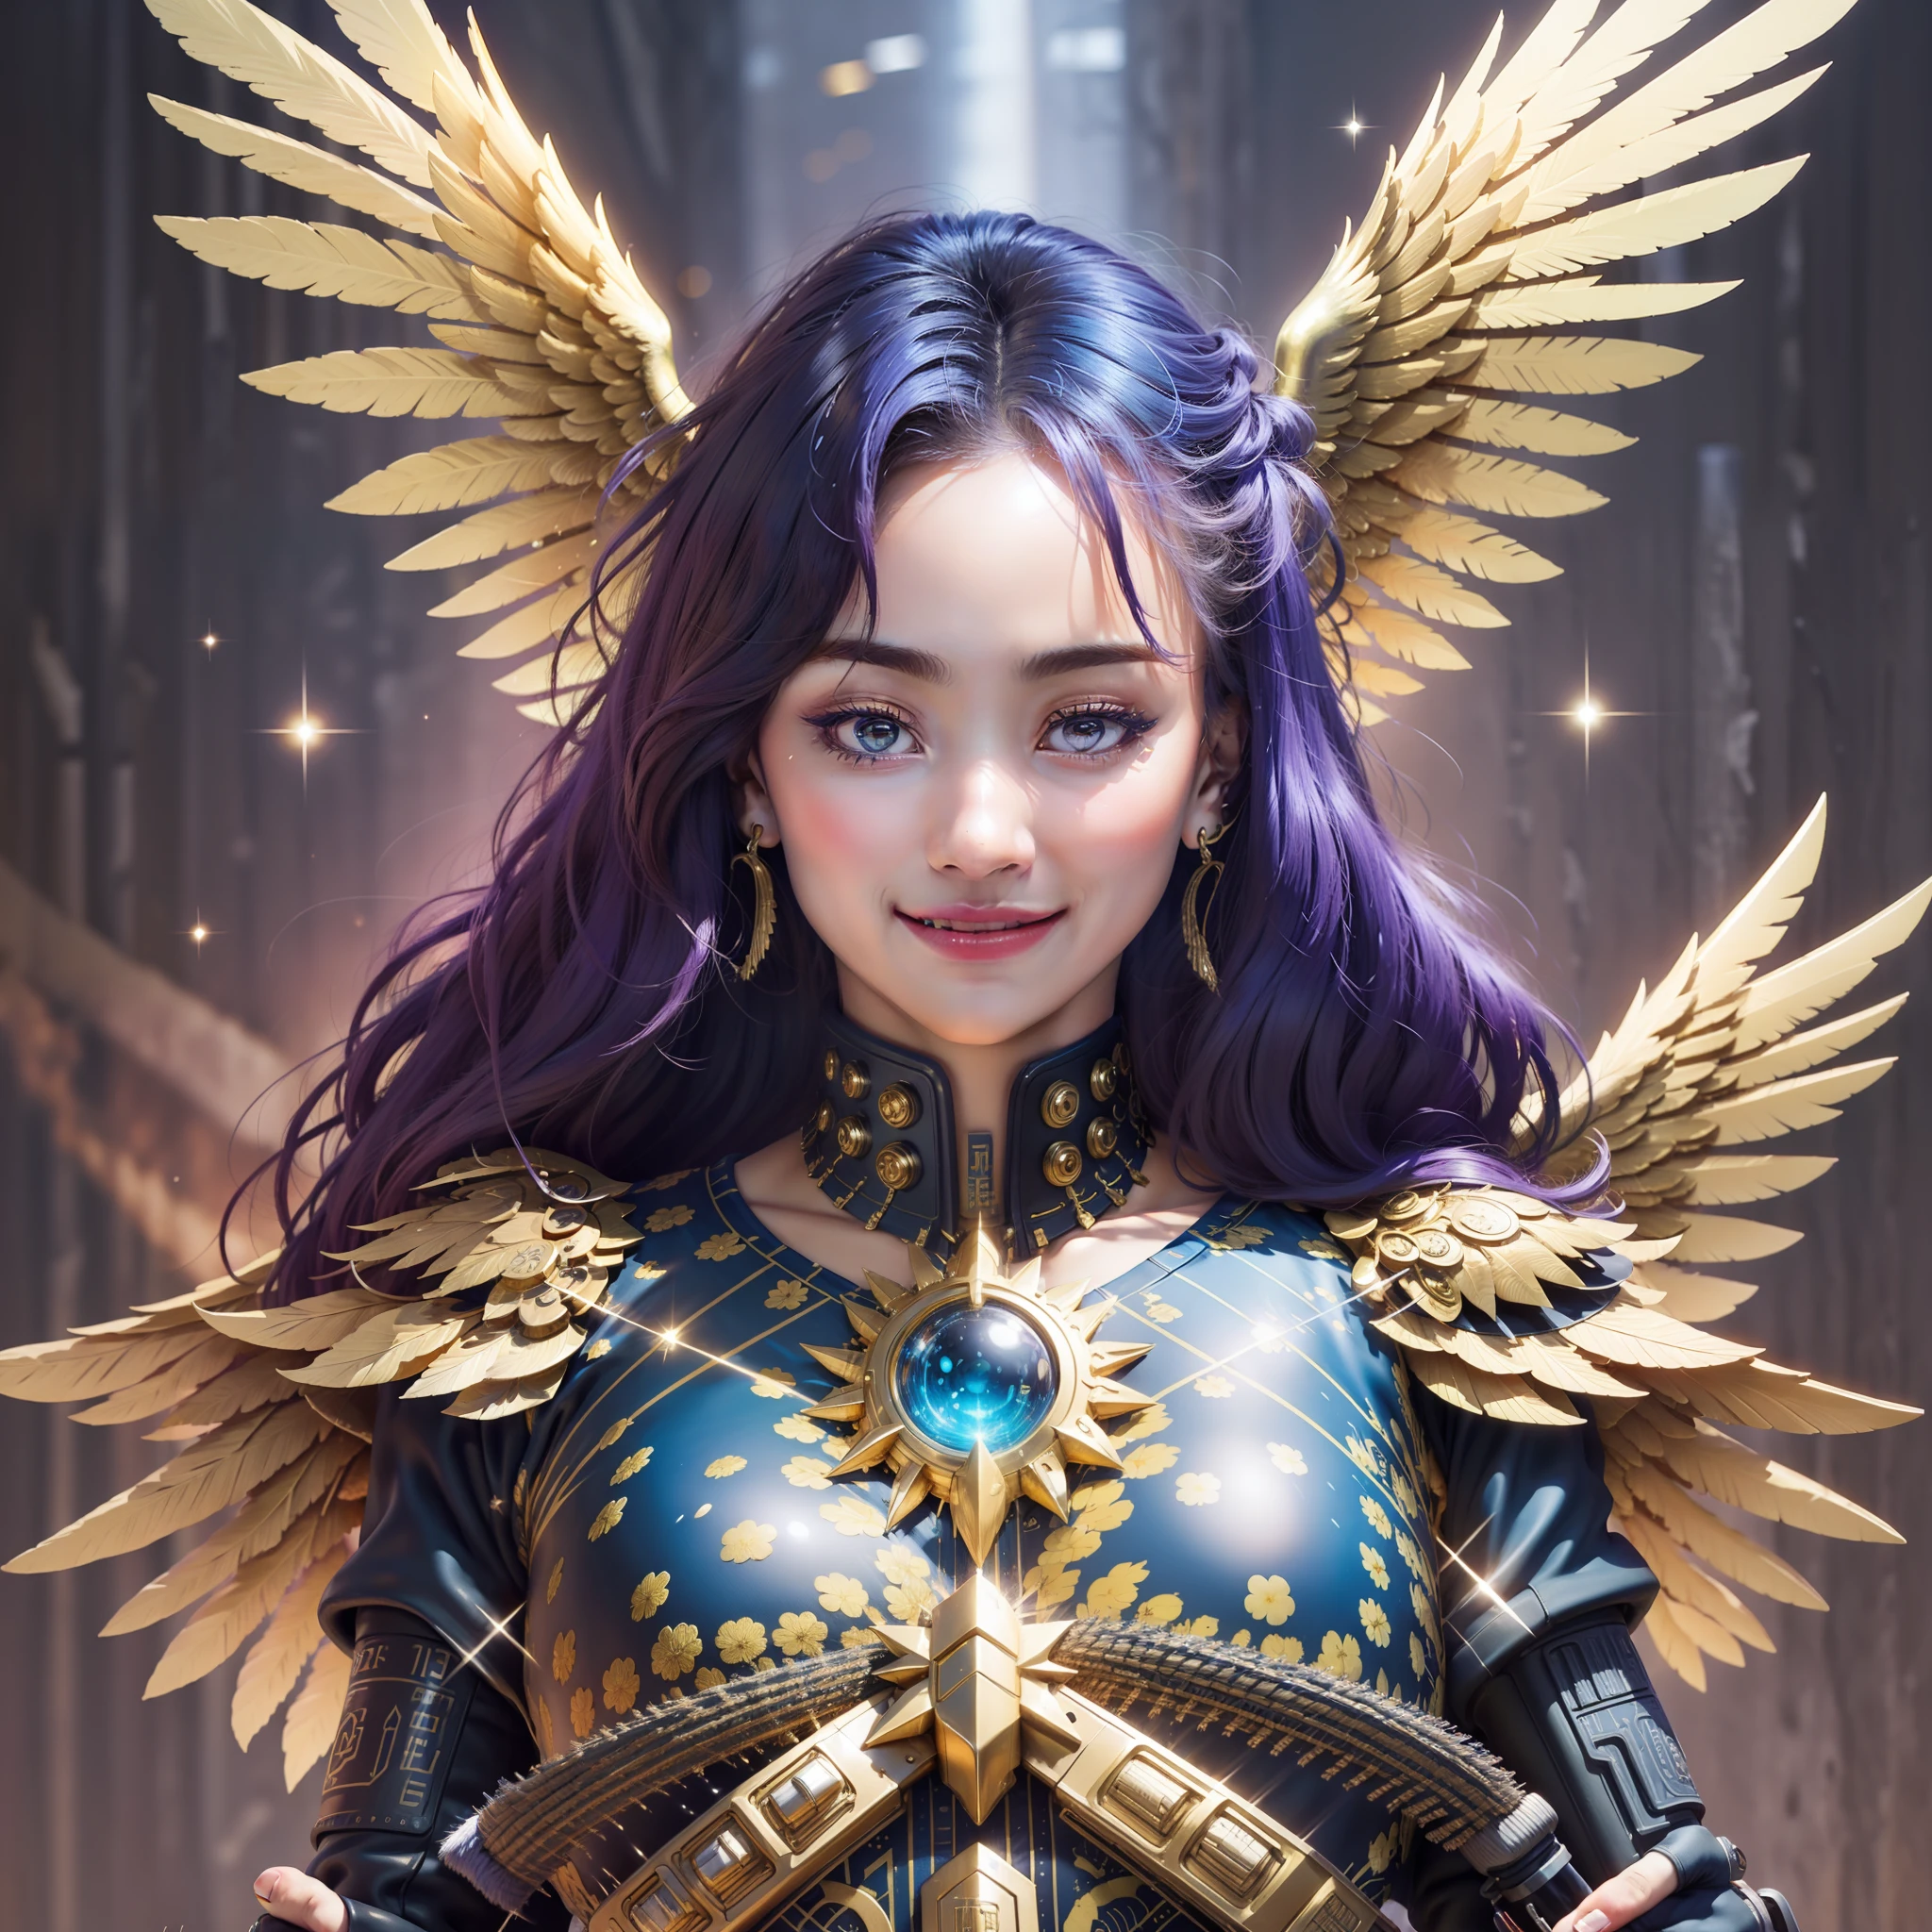 masterpiece,(bestquality),highlydetailed,ultra-detailed,1girl,(mechanicalwings:golden,glowingeyes:blue,goldenrarmor:1.2,elongatedears:0.8),(cyberpunkcity:1.5,weapon:energyblade),(fantasylandscape:1.2,natural lighting:1.5,confidentexpression),(panorama:1.2),mecha, smile,angle,Angels, wings,gold,raw